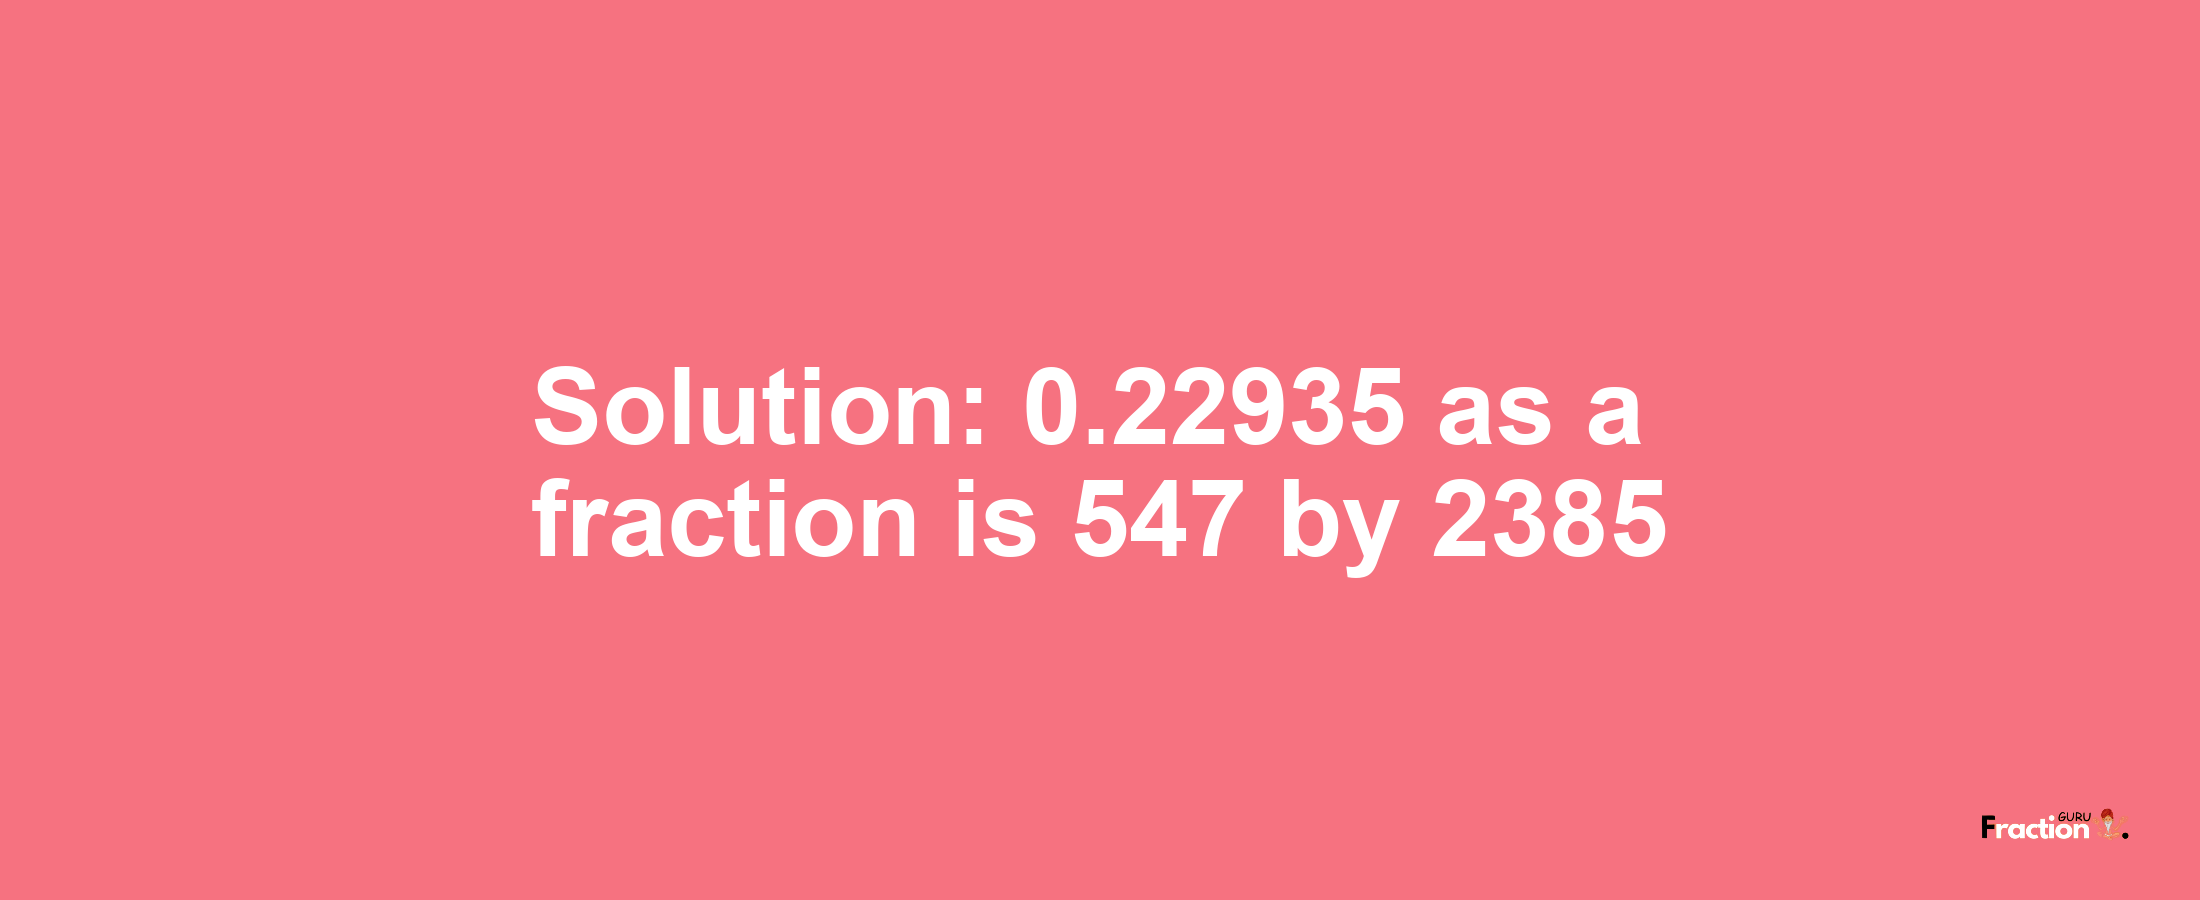 Solution:0.22935 as a fraction is 547/2385